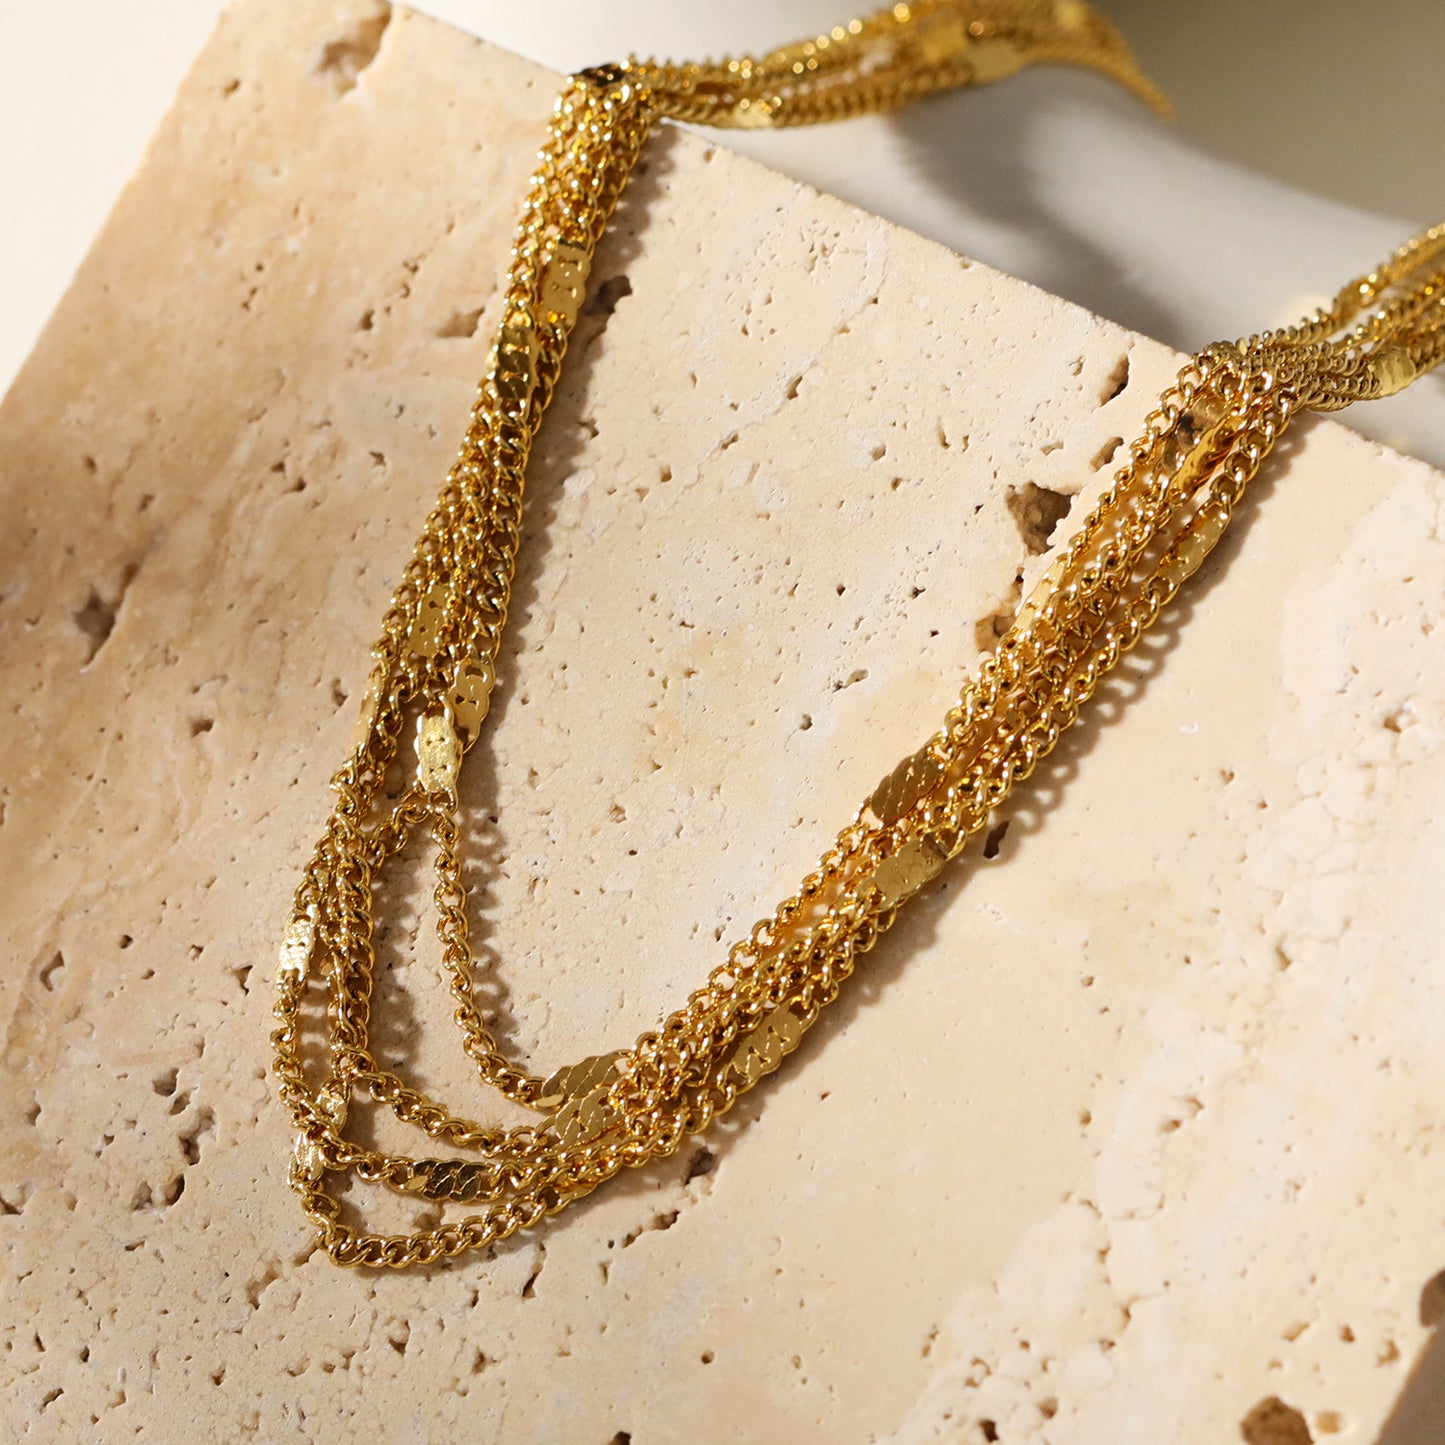 MORIA: Layered Luxe 4-Strand Chain Necklace